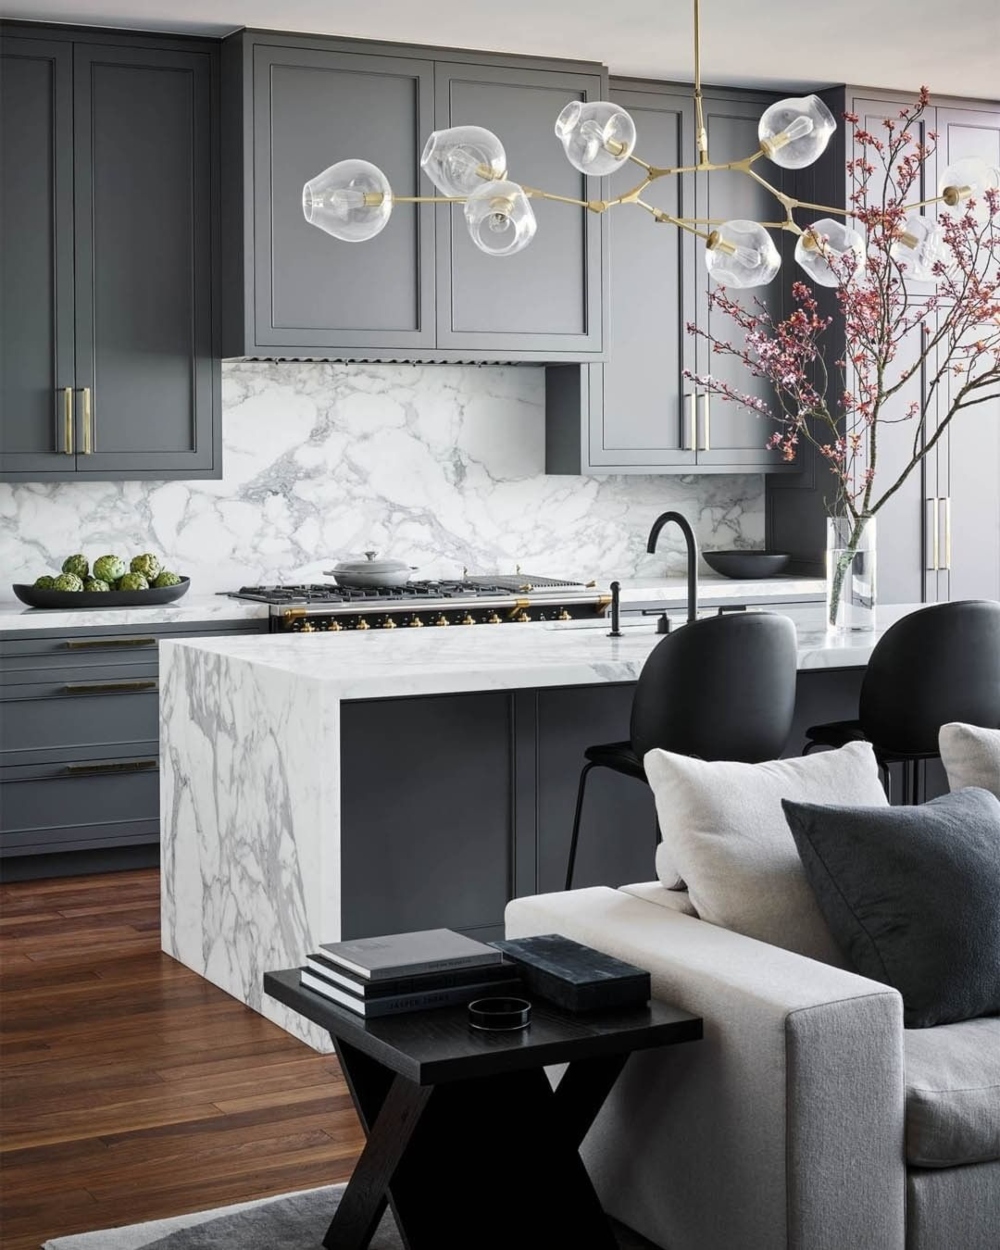 KITCHEN WITH A COMBINATION OF MARBLE AND GREY ACCENTS